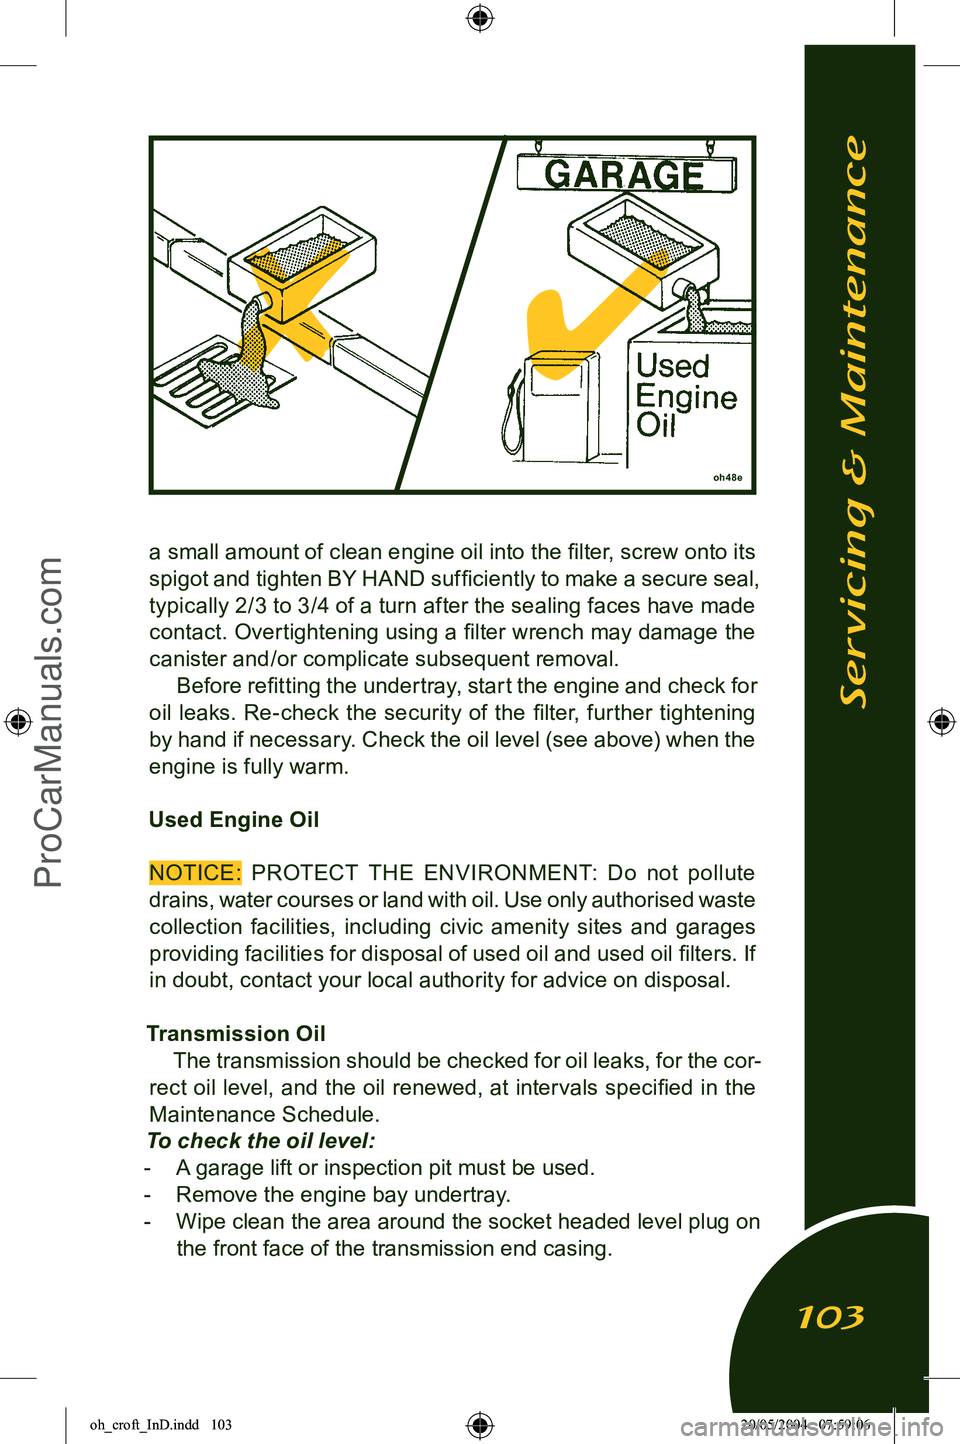 LOTUS ELISE 2005  Owners Manual 
oh48e
a small amount of clean engine oil into the ﬁlter, screw onto its 
spigot and tighten BY HAND sufﬁciently to make a secure seal, 
typically 2/3 to 3/4 of a turn after the sealing faces have